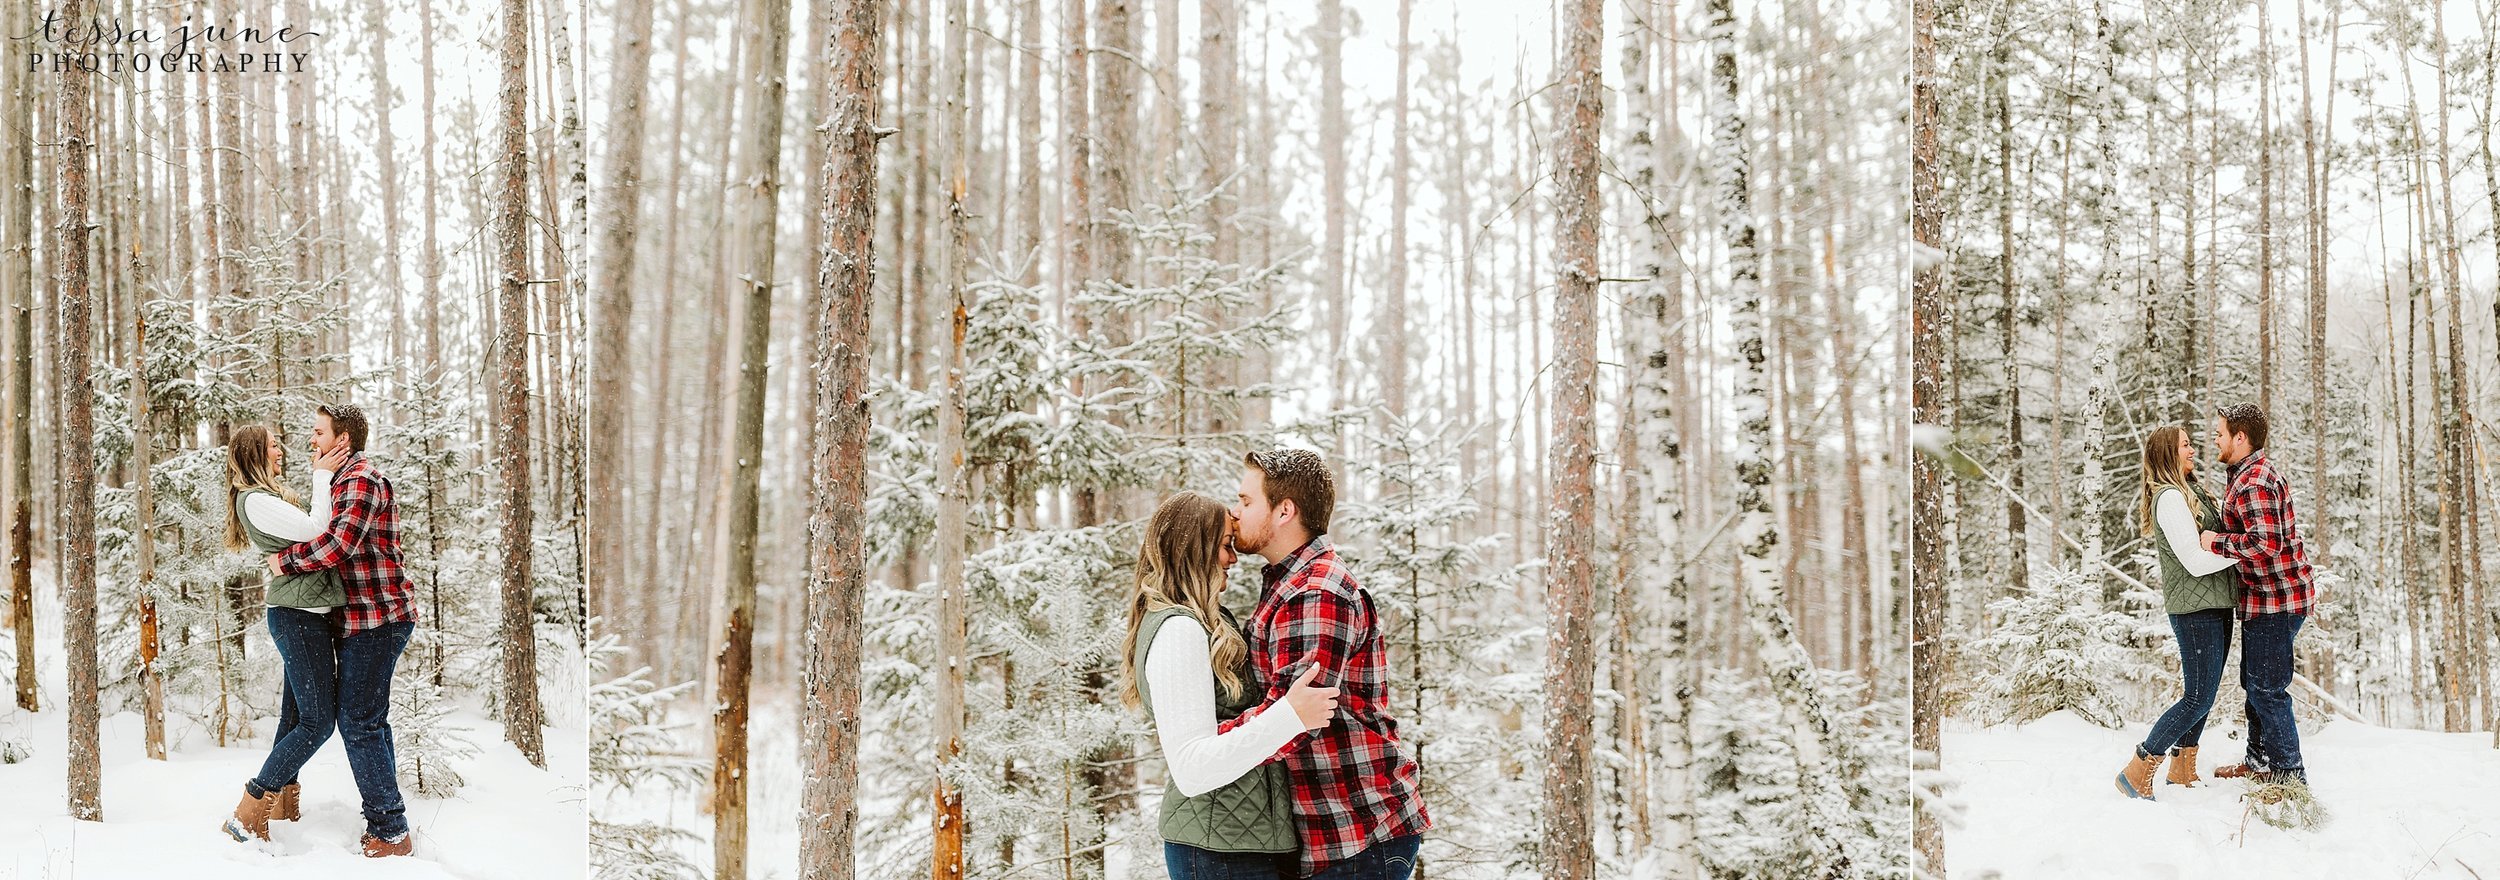 duluth-winter-engagement-forest-photos-during-snow-storm-2.jpg